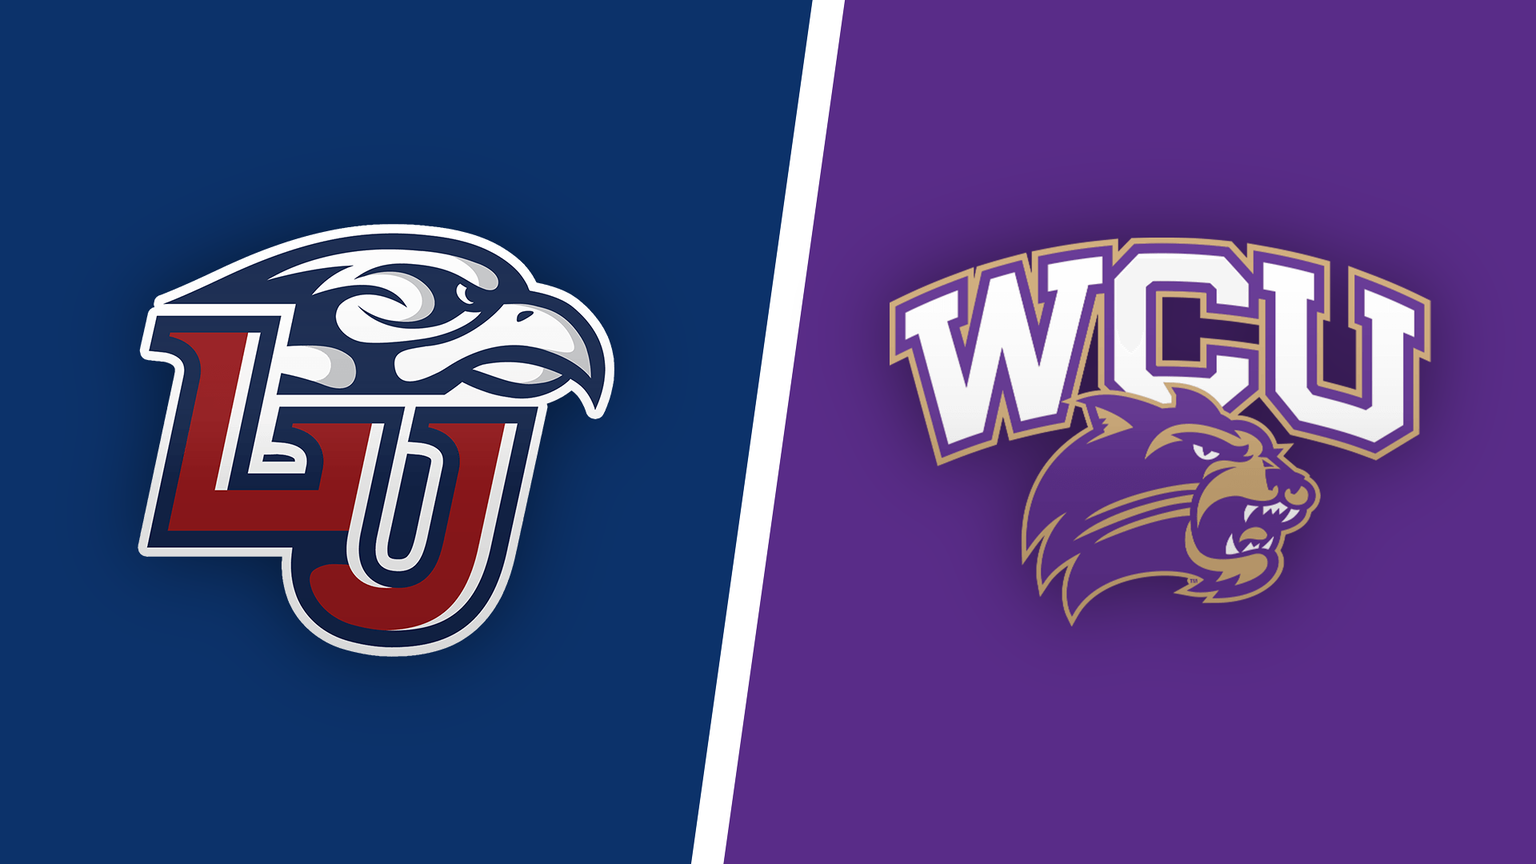 How to Watch Liberty vs. Western Carolina on ESPN3 for Free on Apple TV